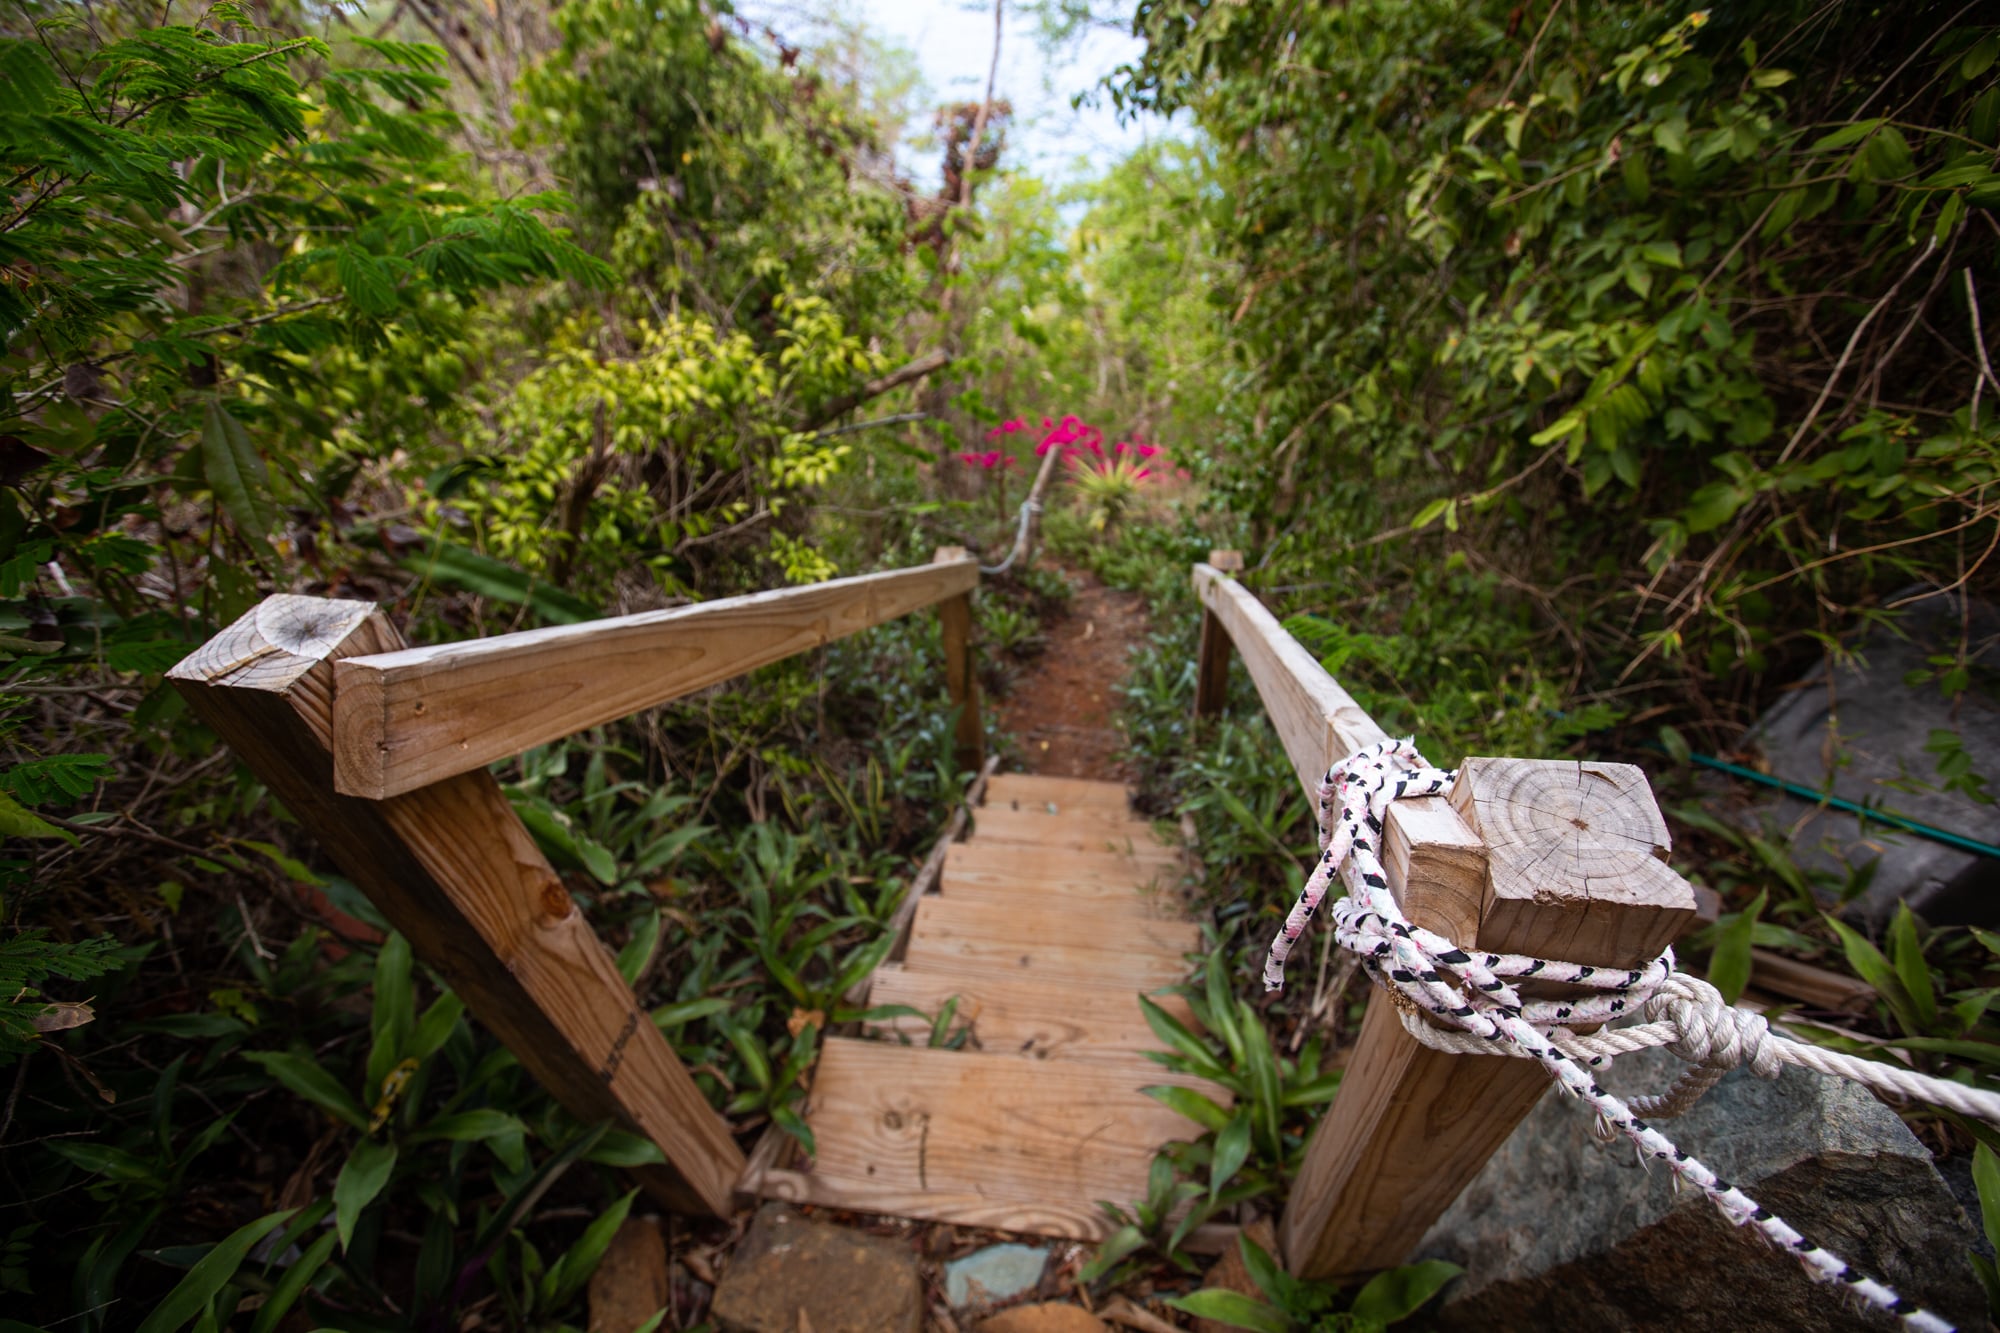 The path to Jim Kerr's secluded home on St. Thomas is long and steep. The ropes were installed after the 78-year-old Kerr, who is blind, had a hard time making his way up the hill from his cabin. (Anya Magnuson/News21)